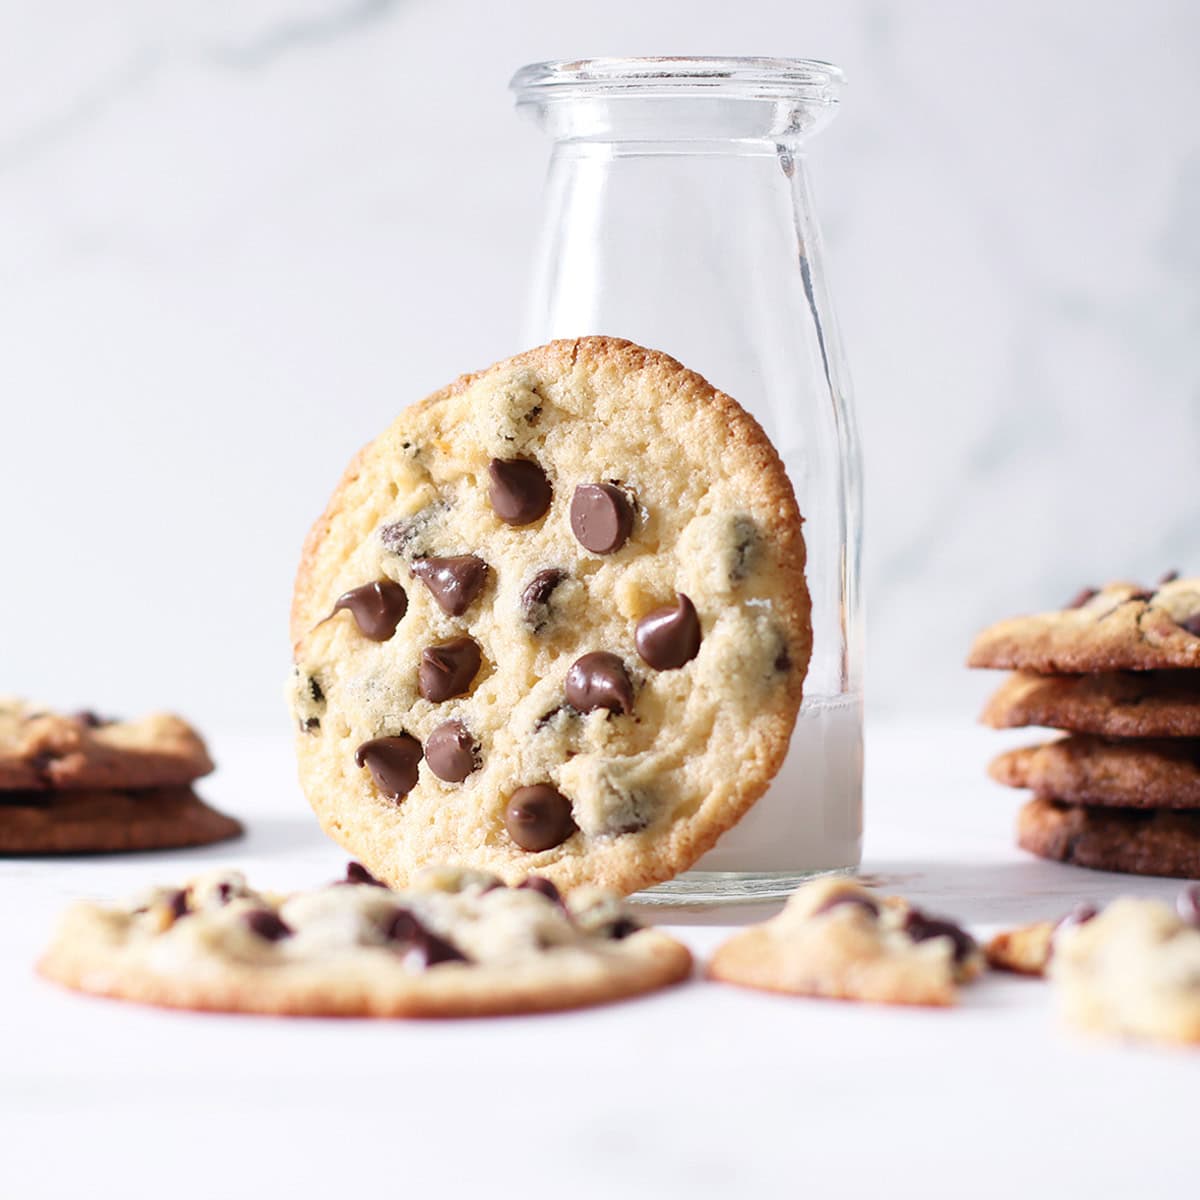 tates thin and crispy chocolate chip cookies only dairy free and vegan and healthier without eggs.